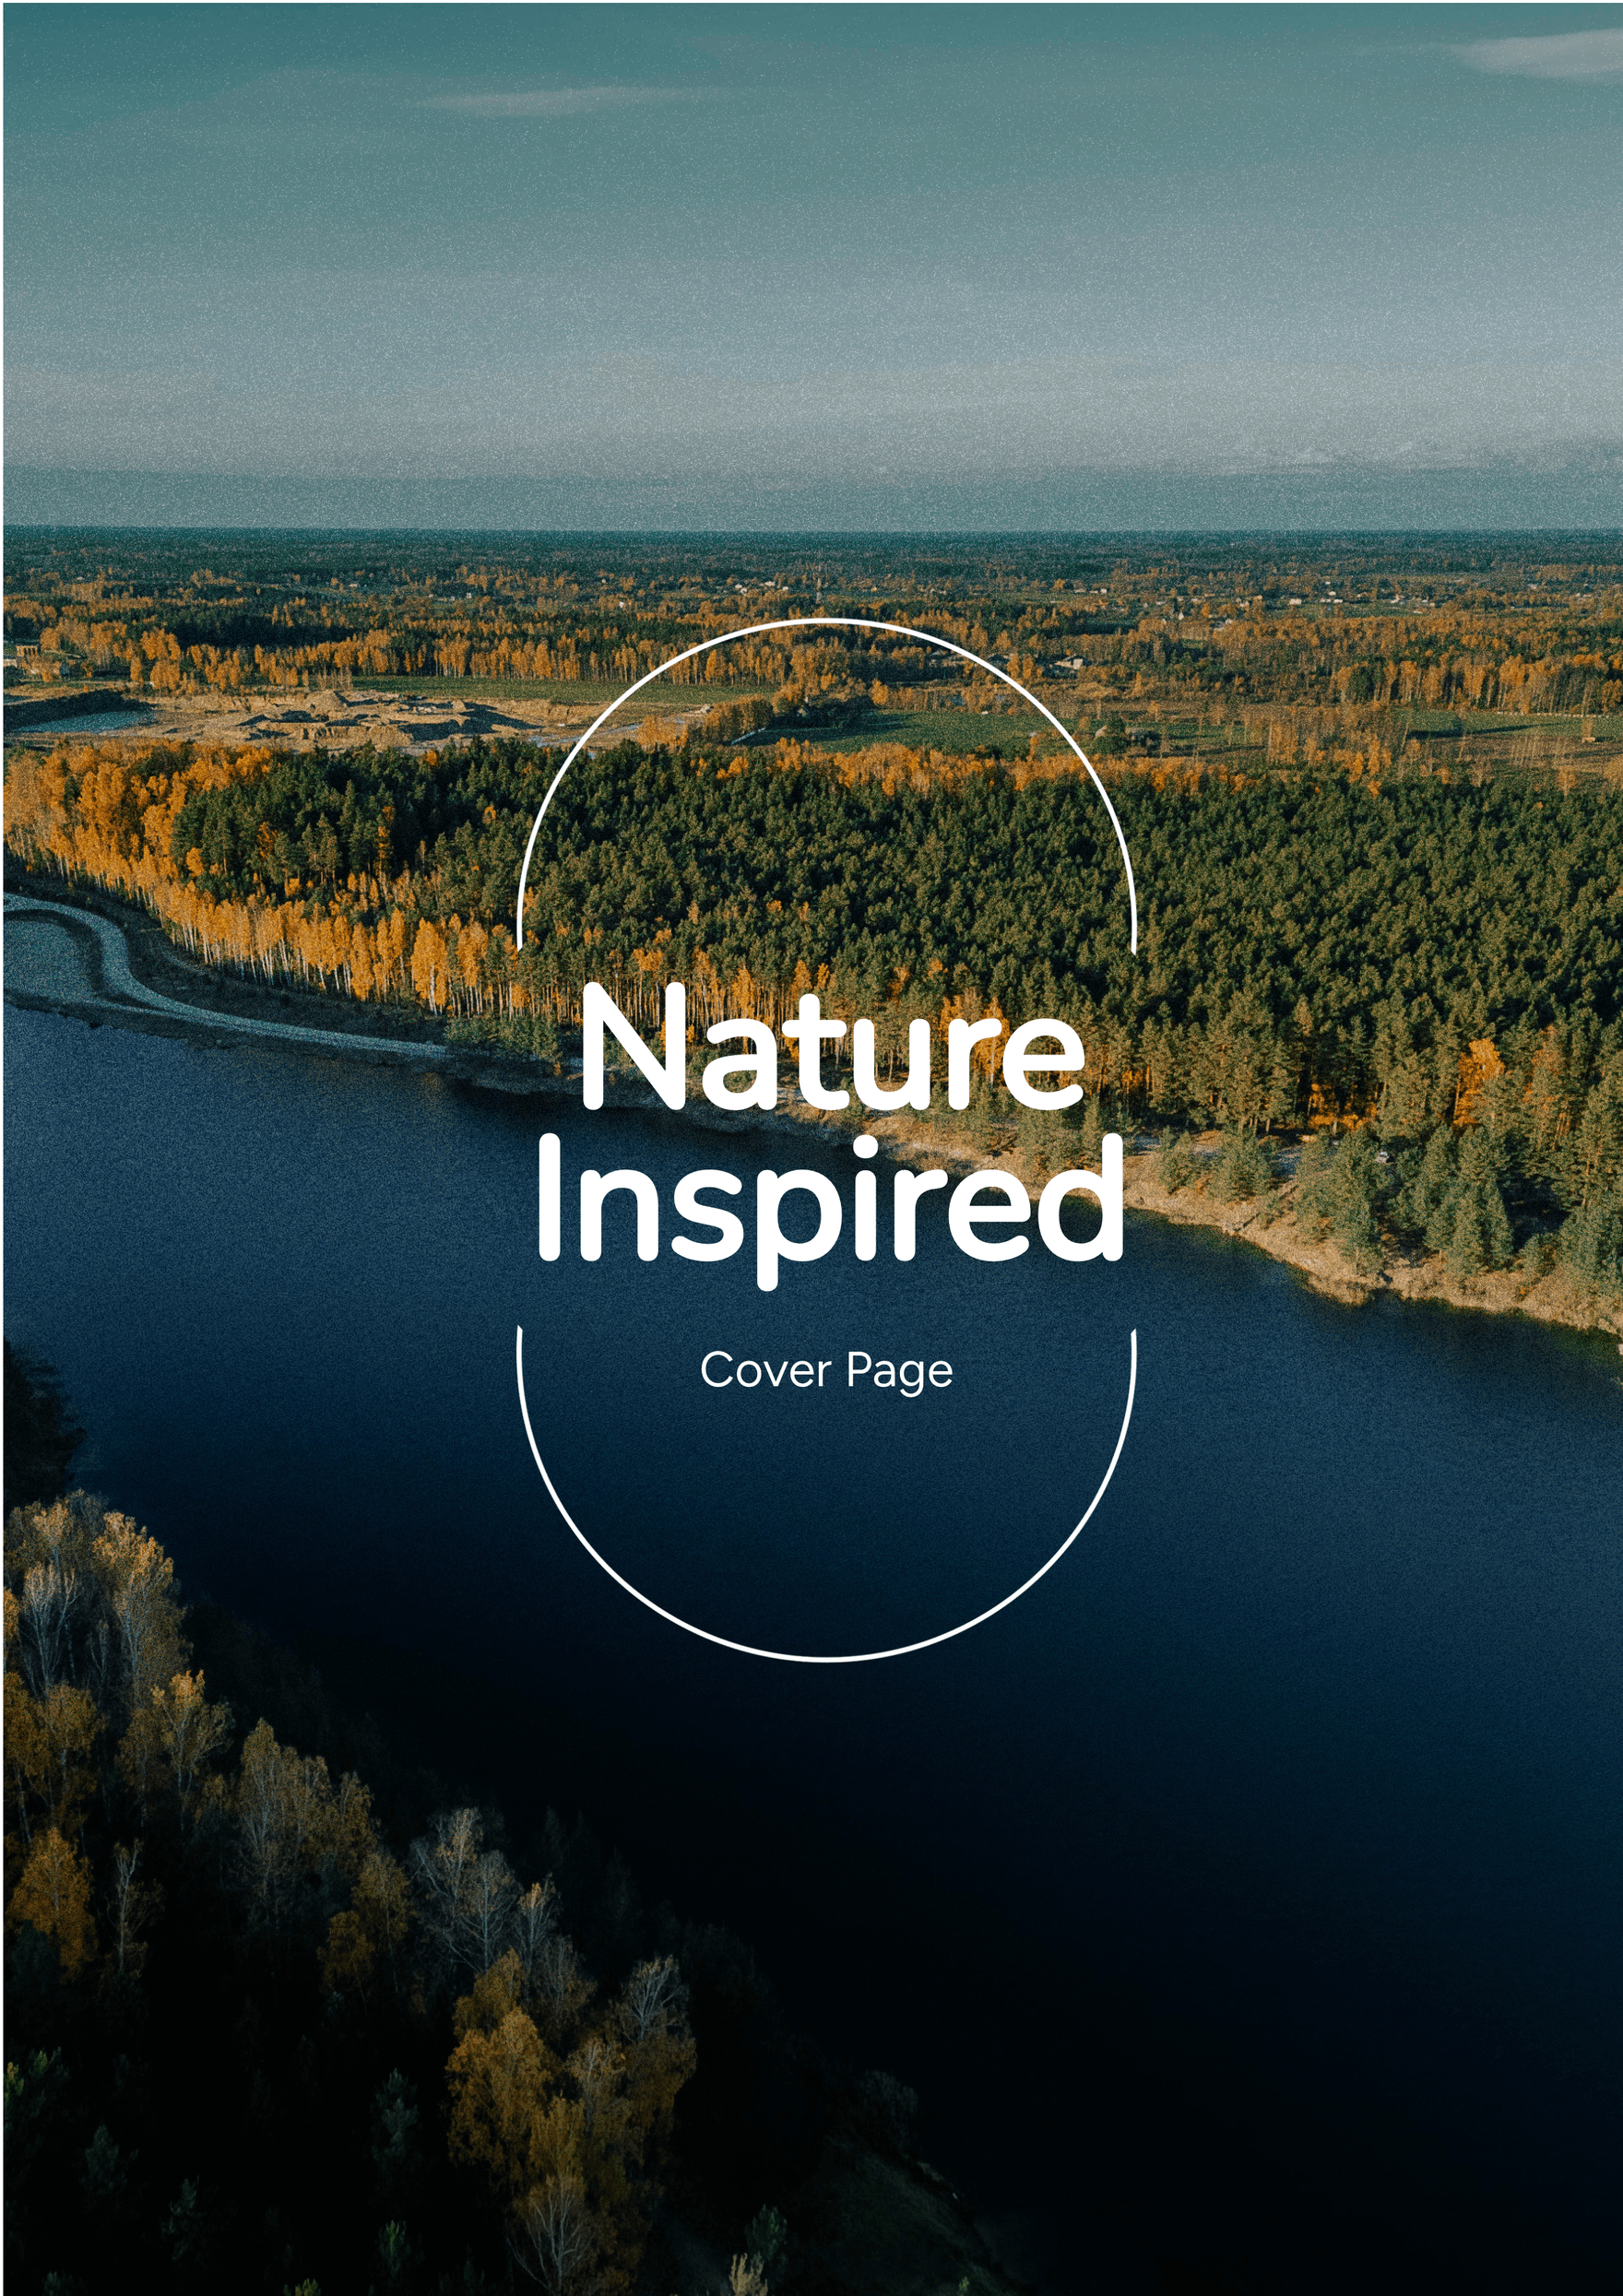 Nature-Inspired Title Cover Page Template